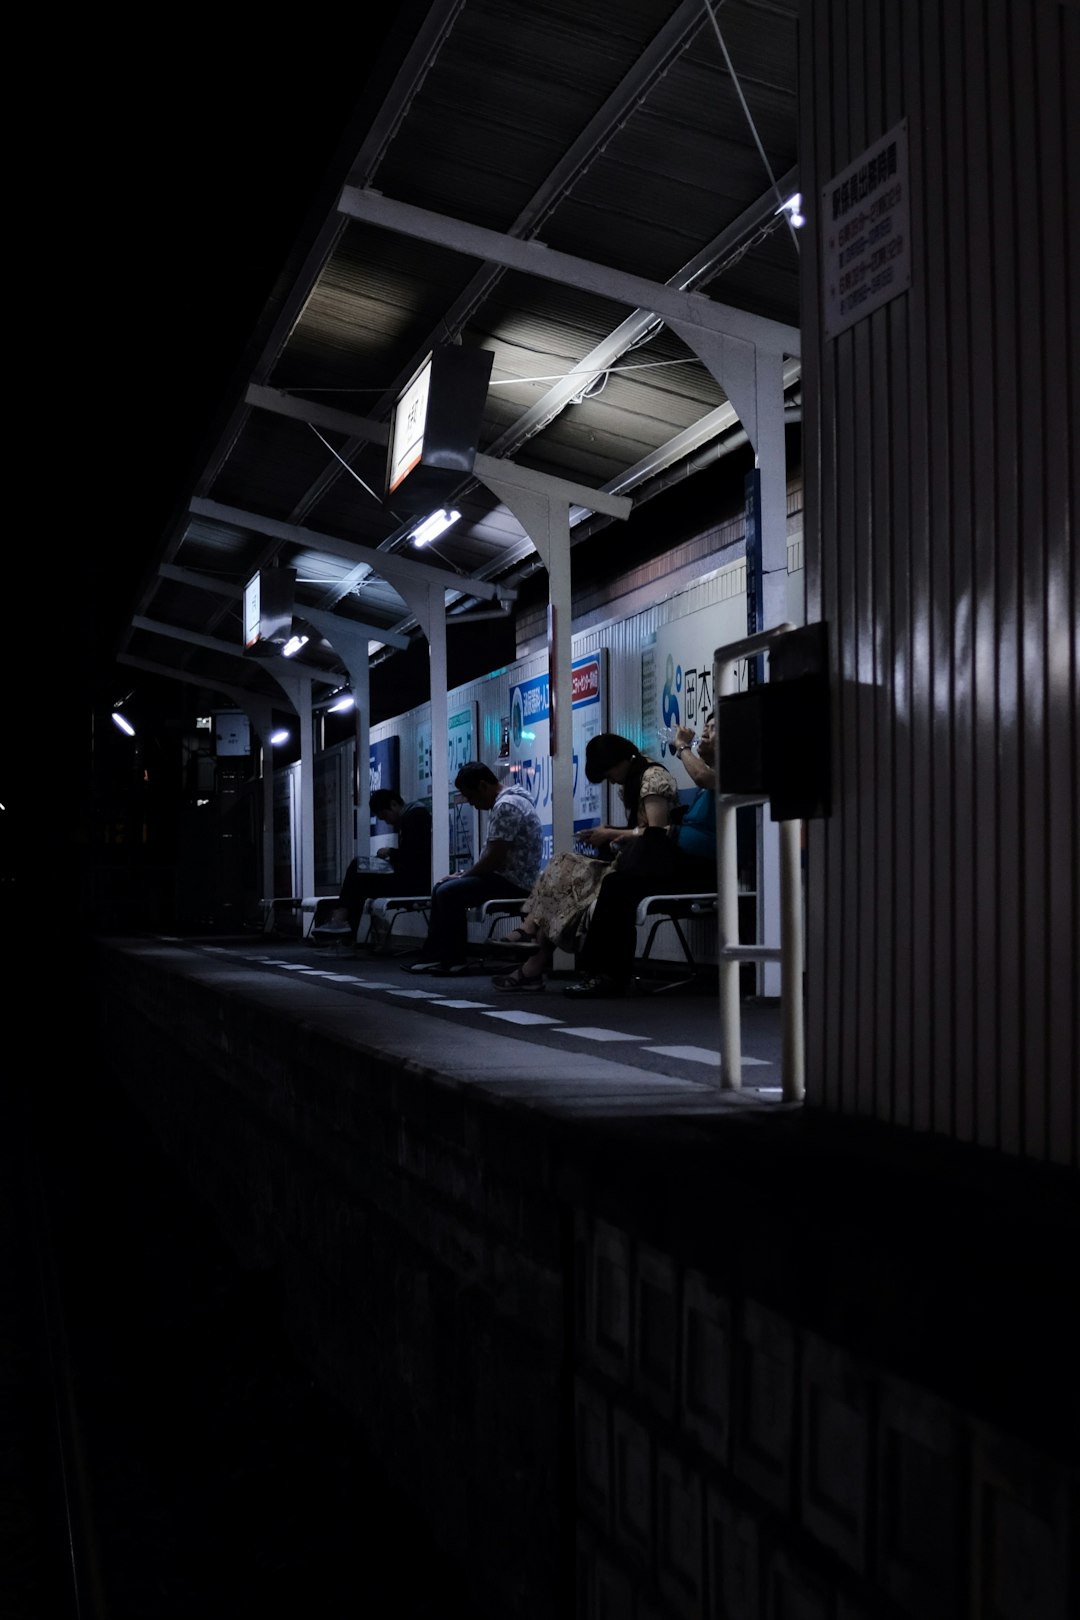 people in a waiting shed during nighttime